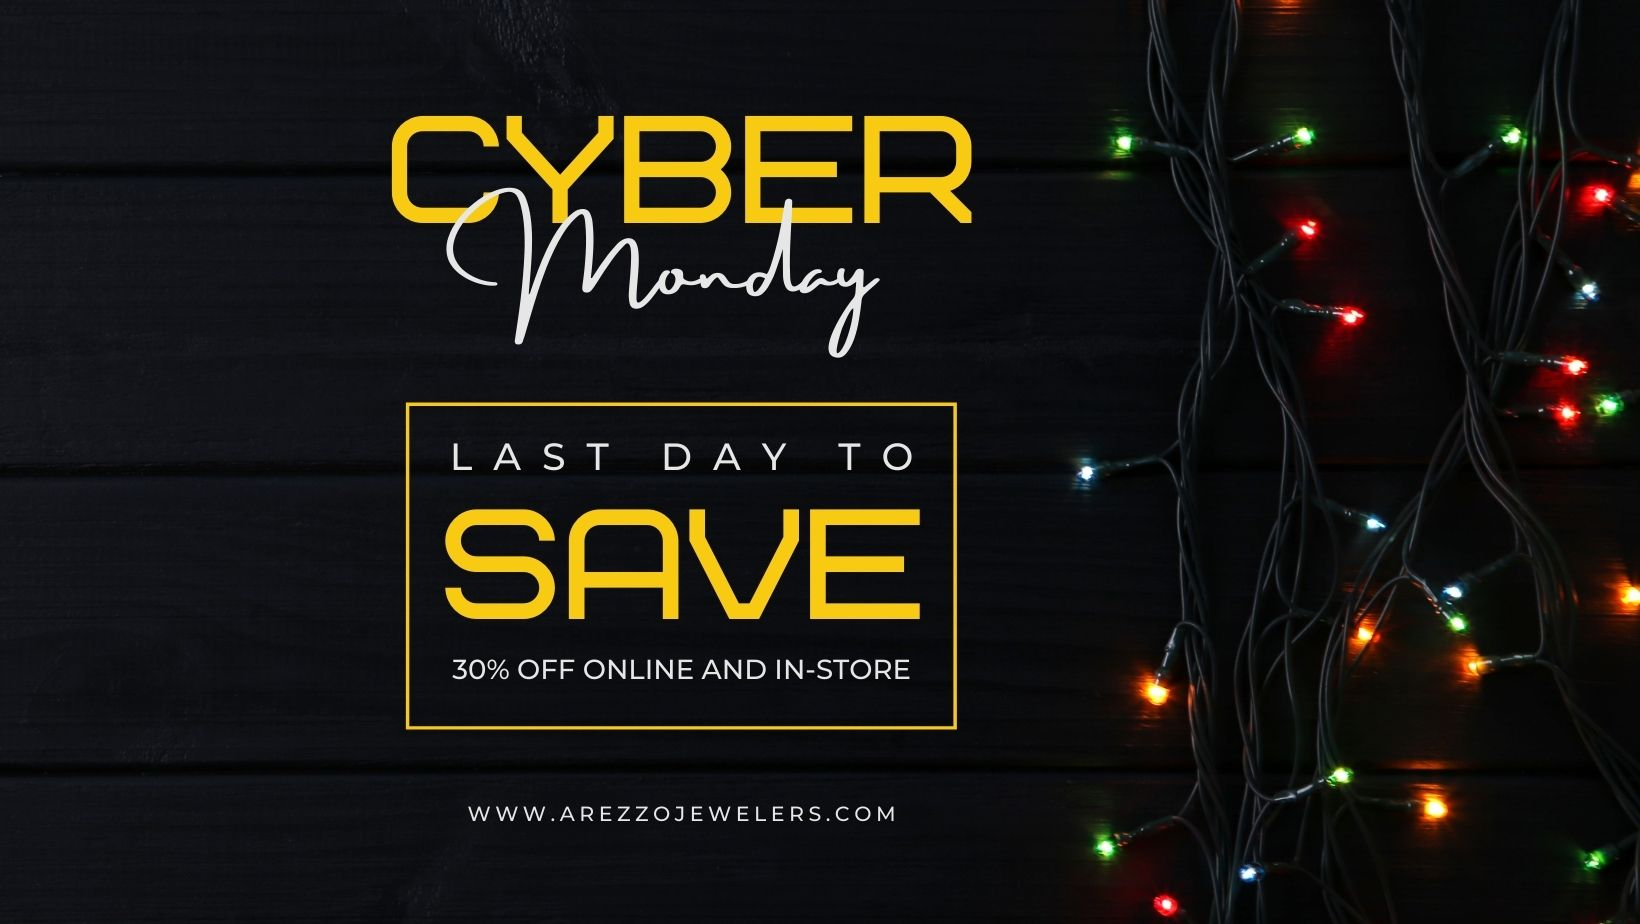 Last day to save!